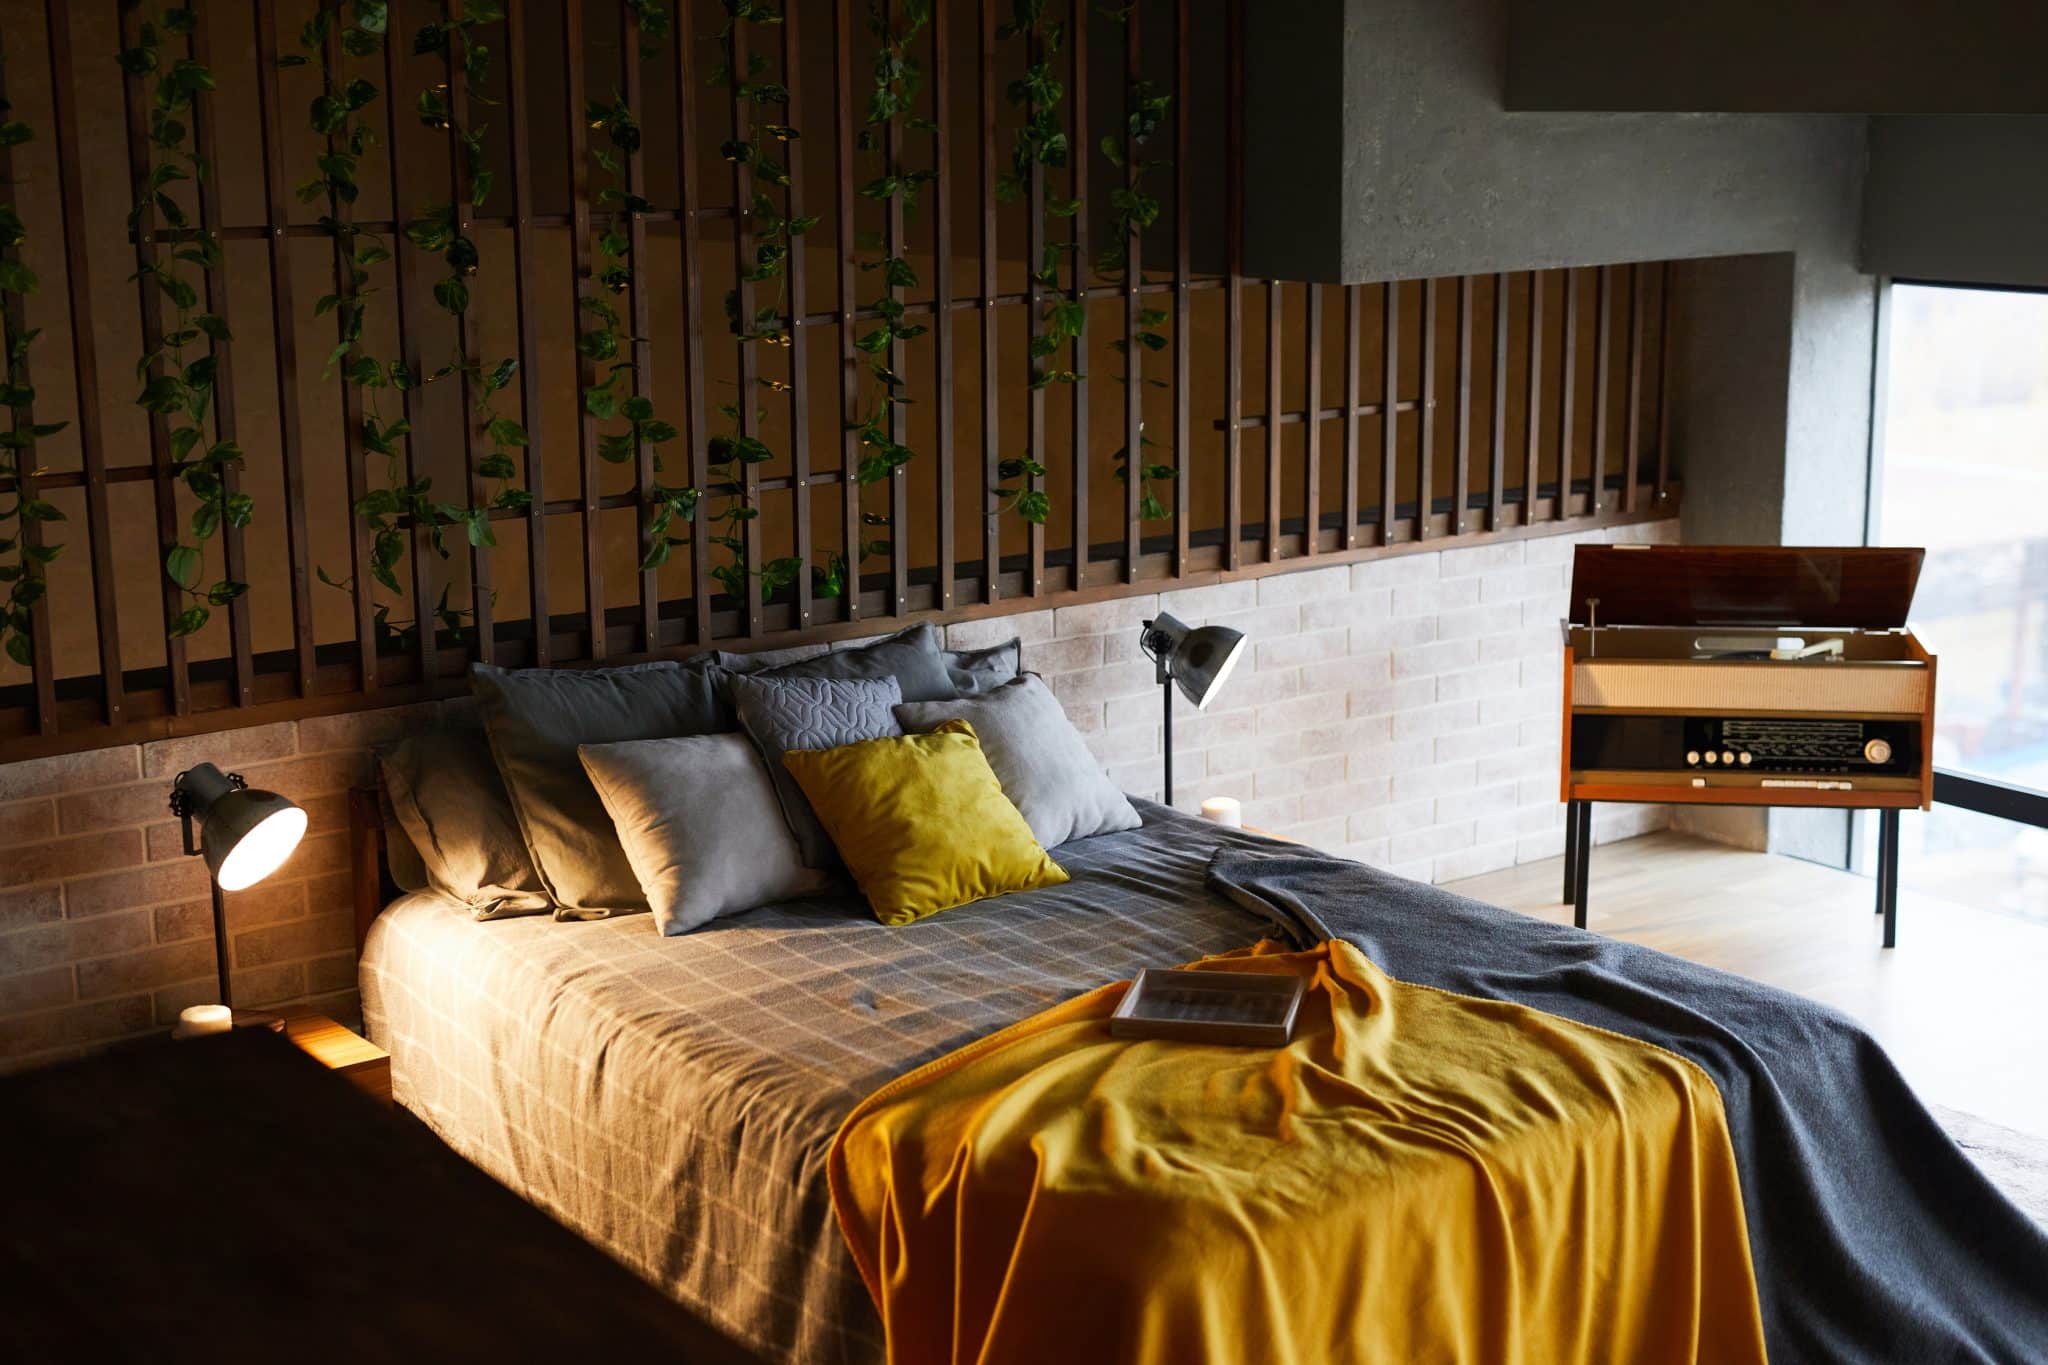 What are the Best Types of Bed Linen to Choose?